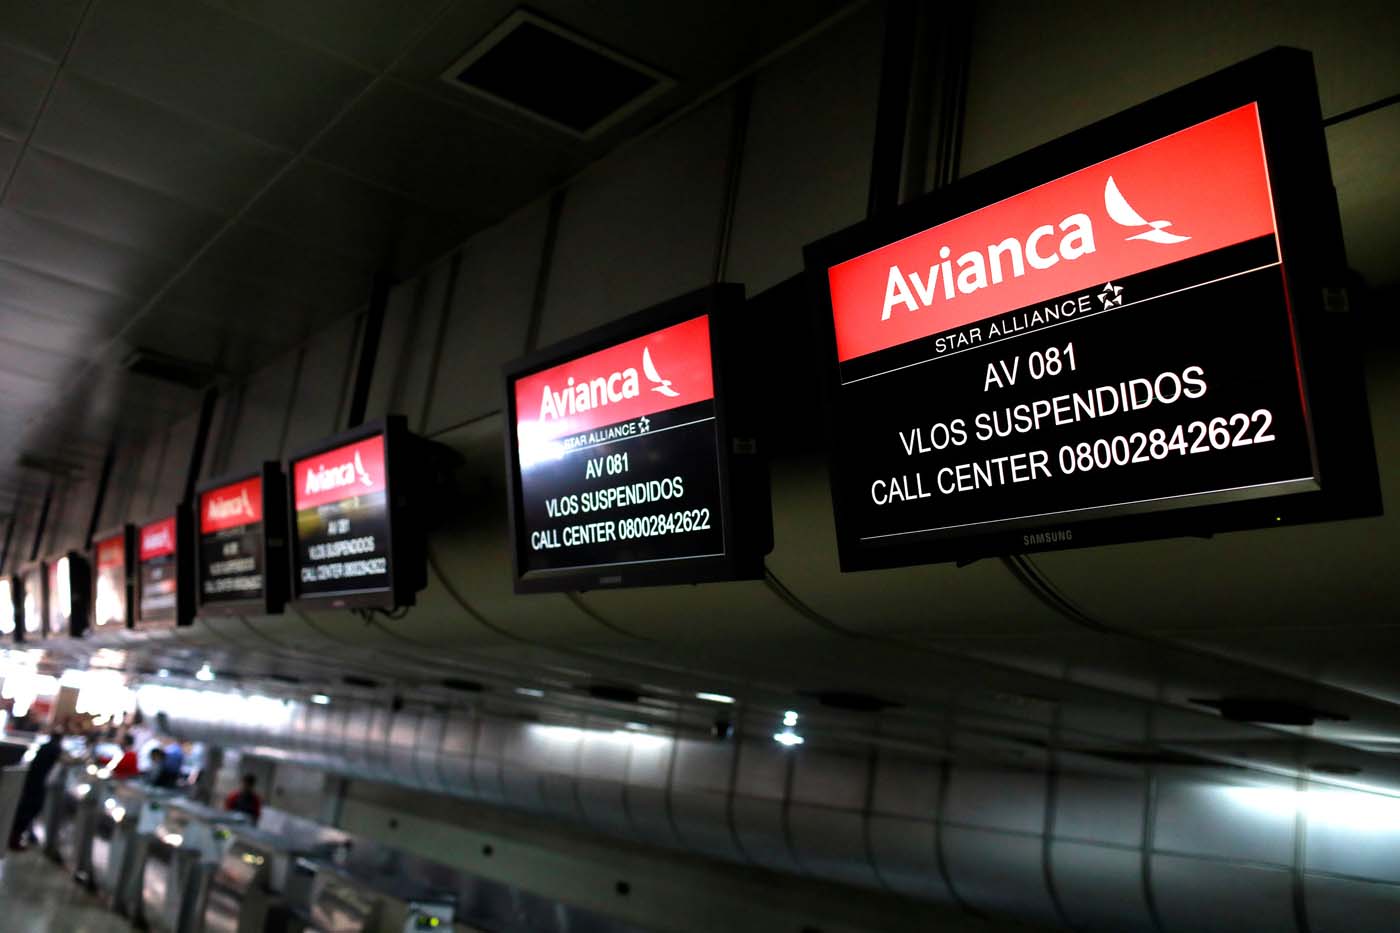 Screens hang above counters of Avianca airline, at the Simon Bolivar airport in Caracas, Venezuela July 27, 2017. The screens read "Flights cancelled". REUTERS/Marco Bello